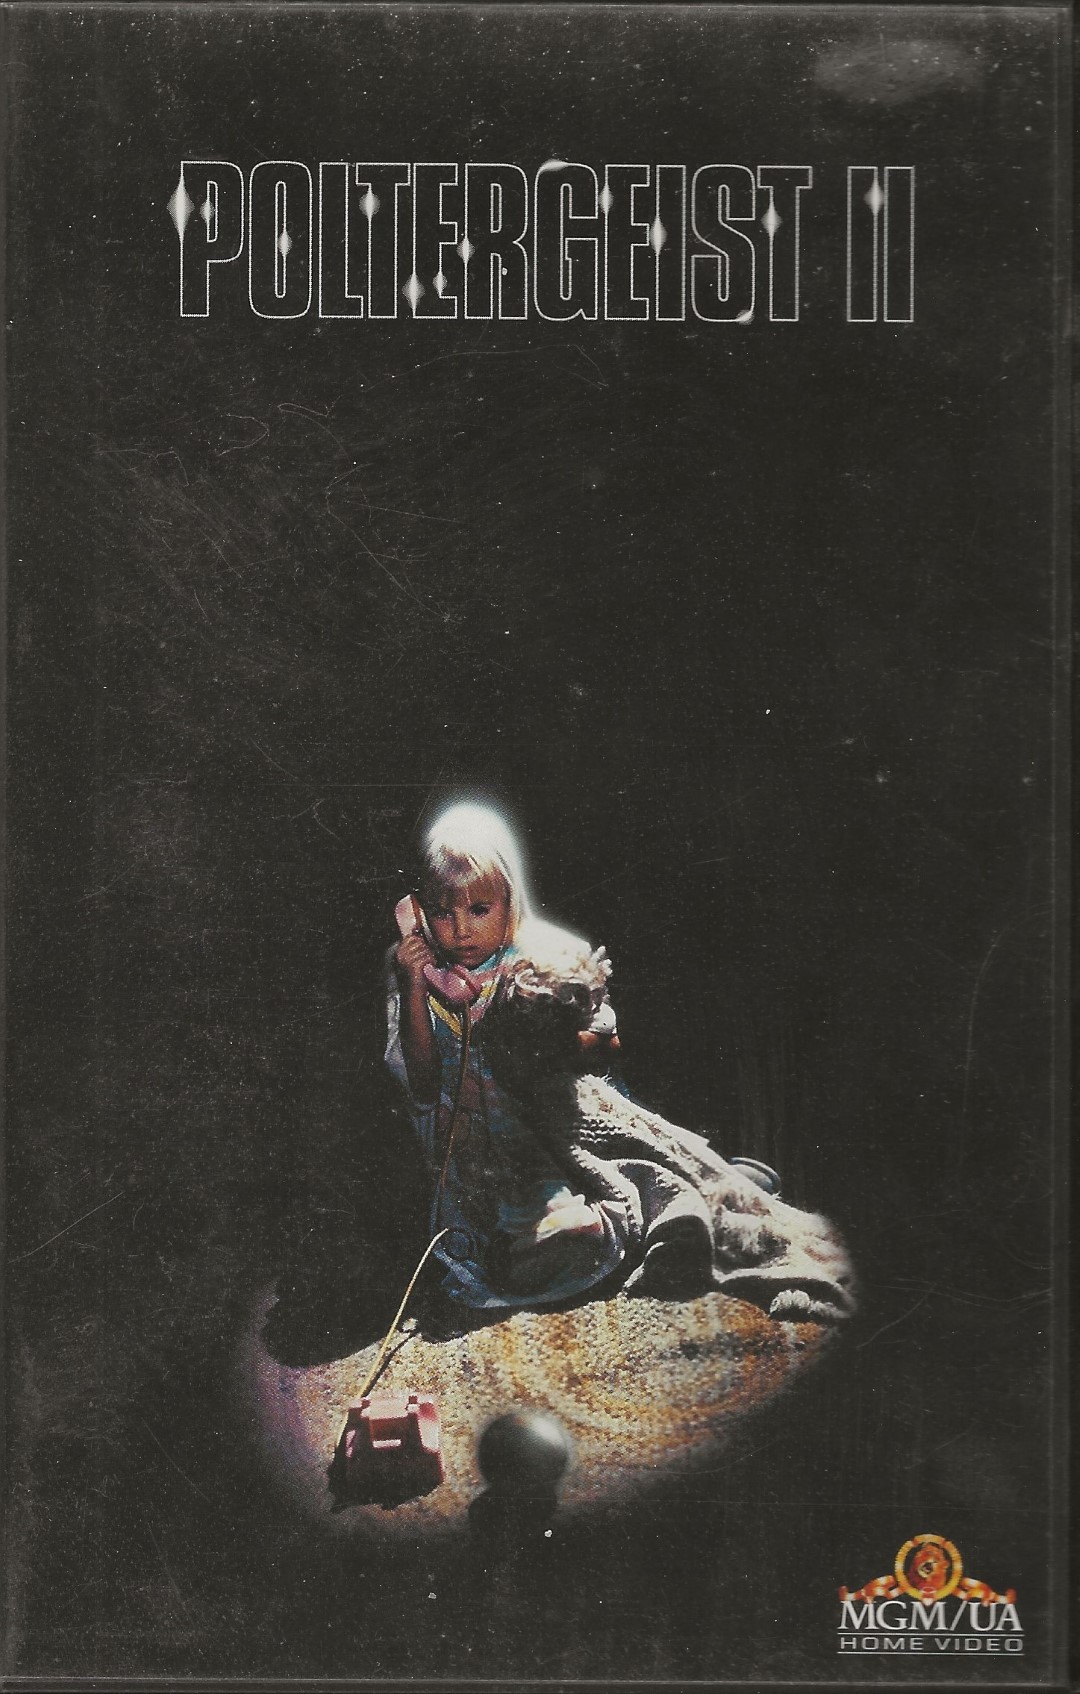 Poltergeist II: The Other Side  VHS MGM/UA Home Video 1986